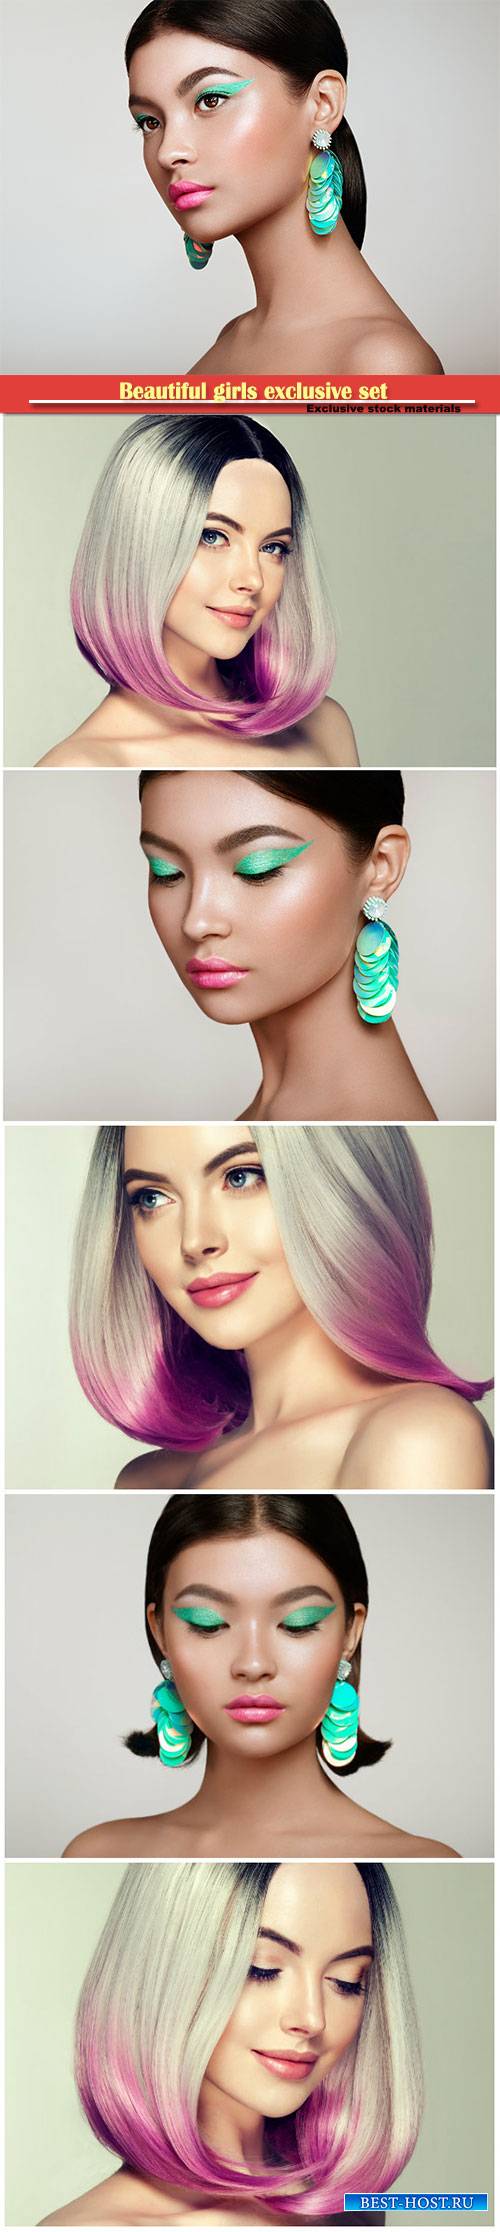 Fashion girls with makeup and dyed hair